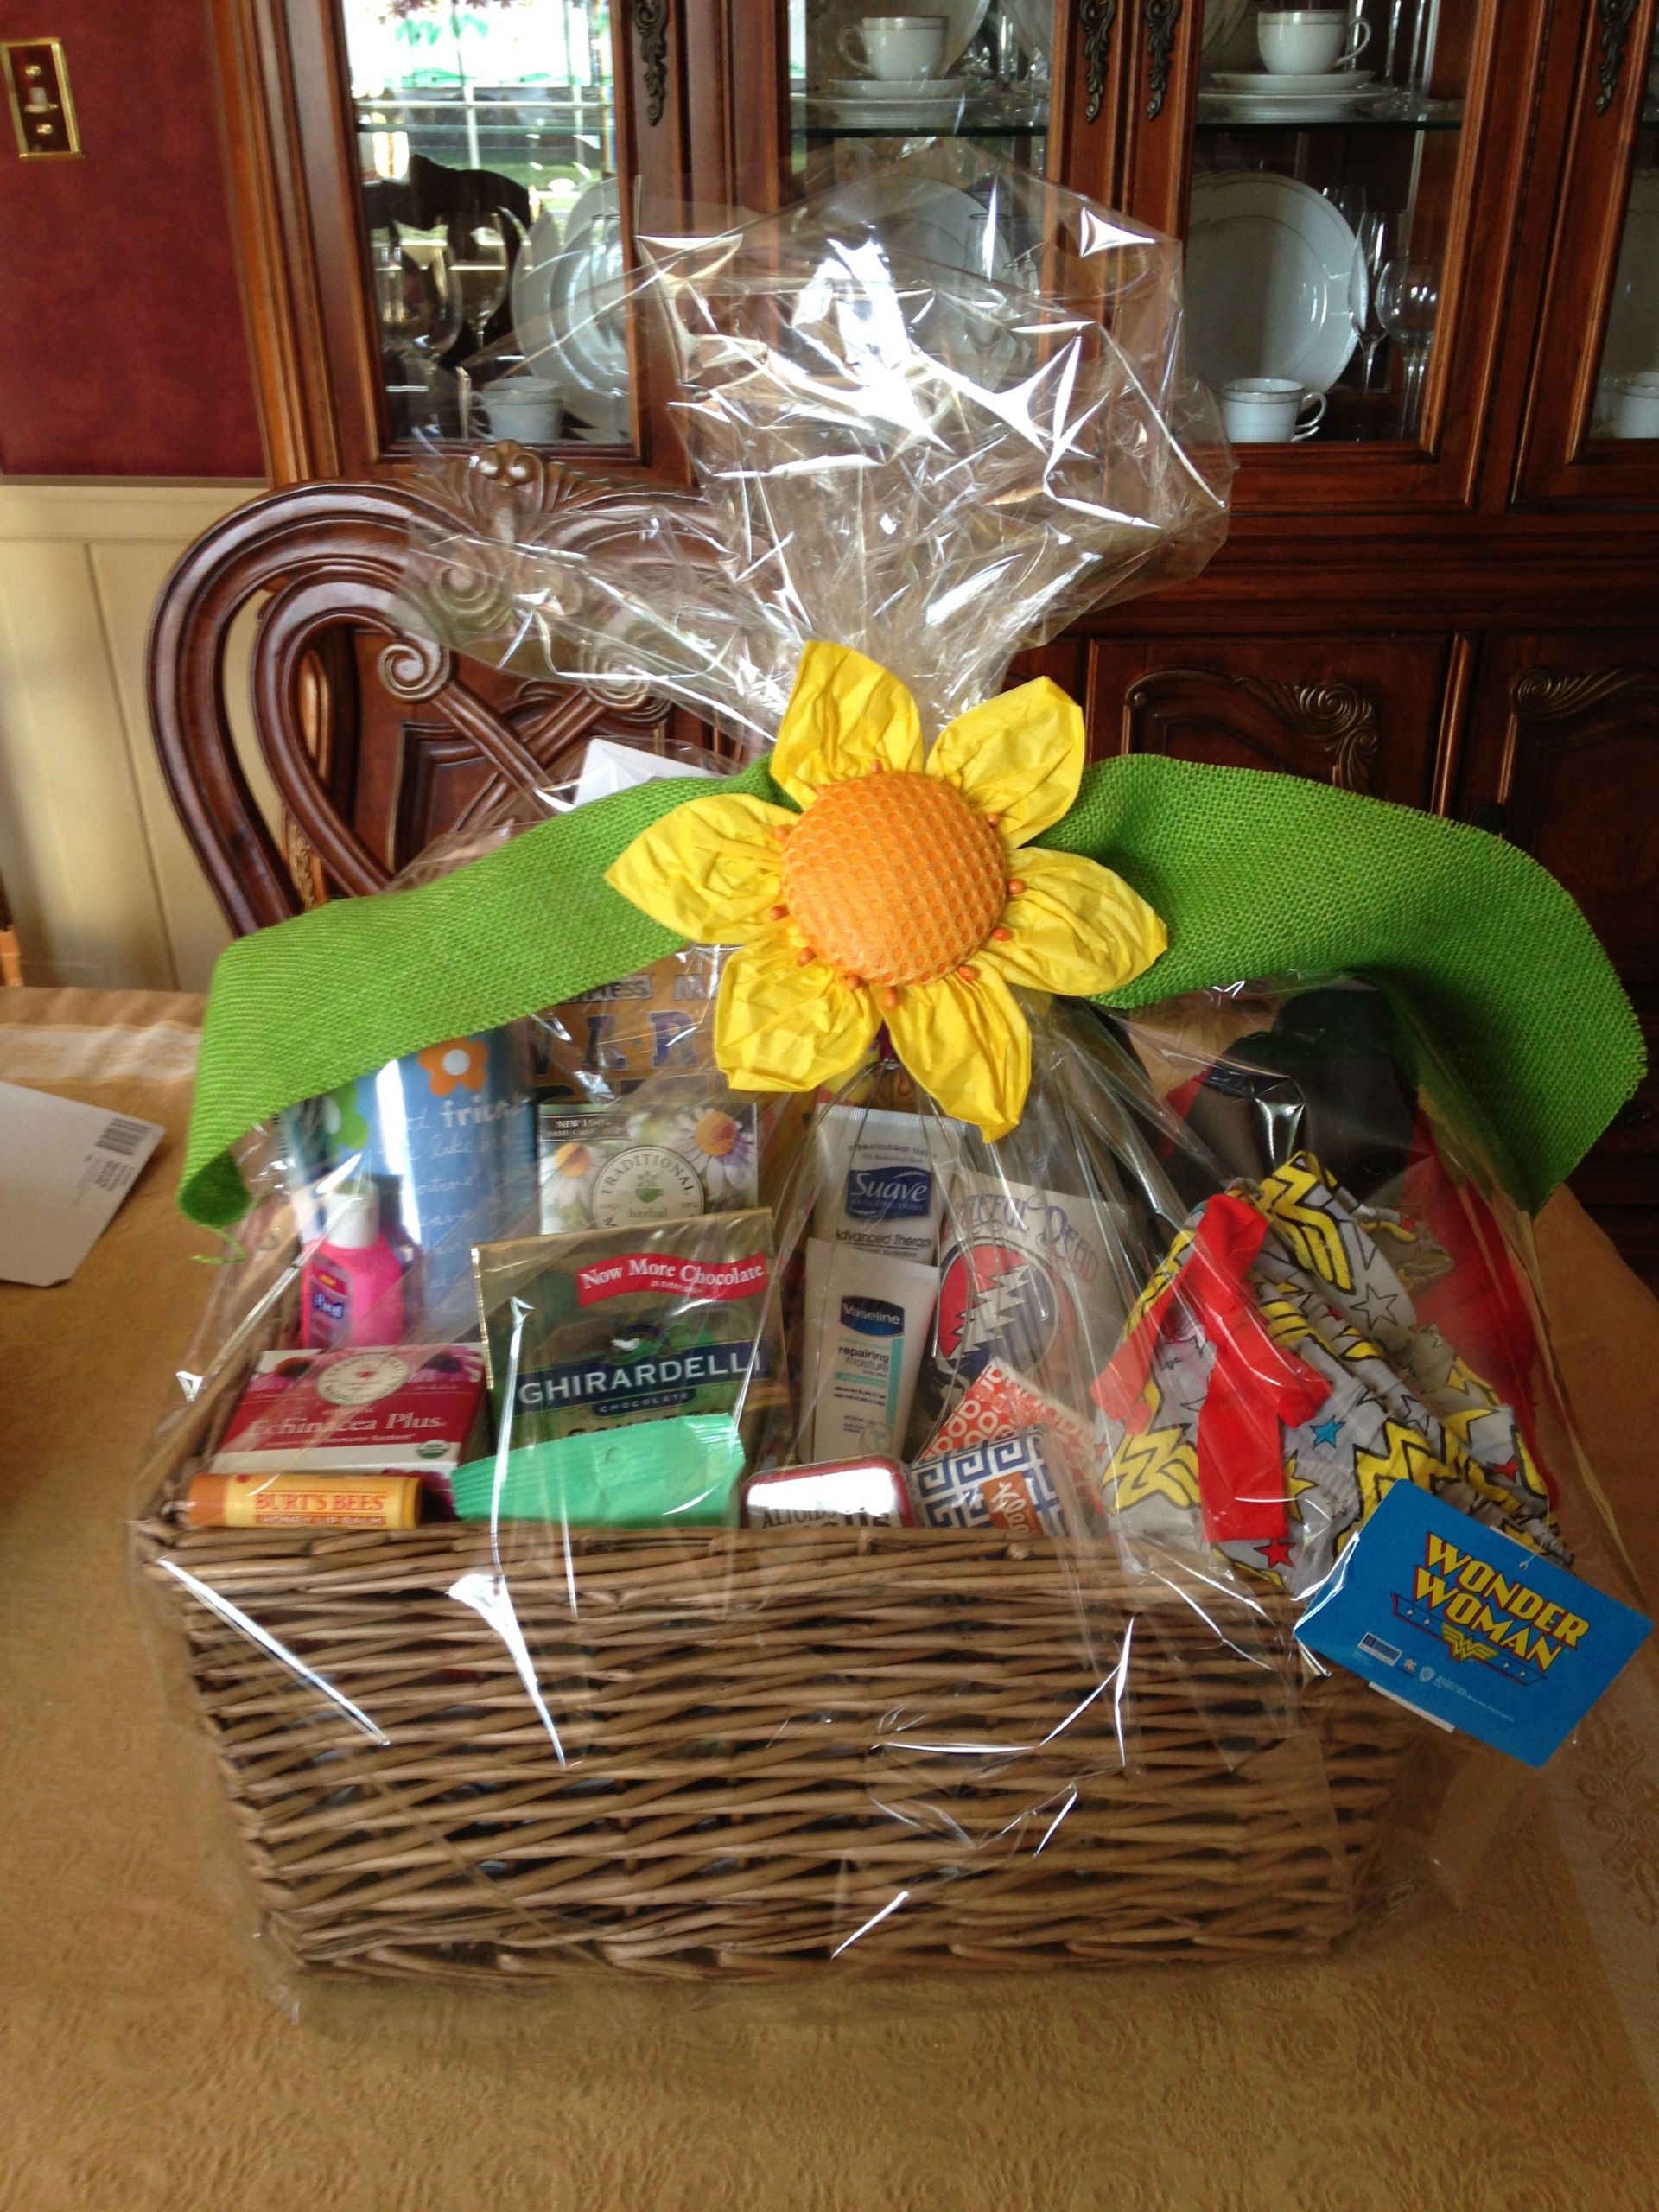 Get Well Gift Basket Ideas After Surgery
 Wrapped basket for friend after surgery